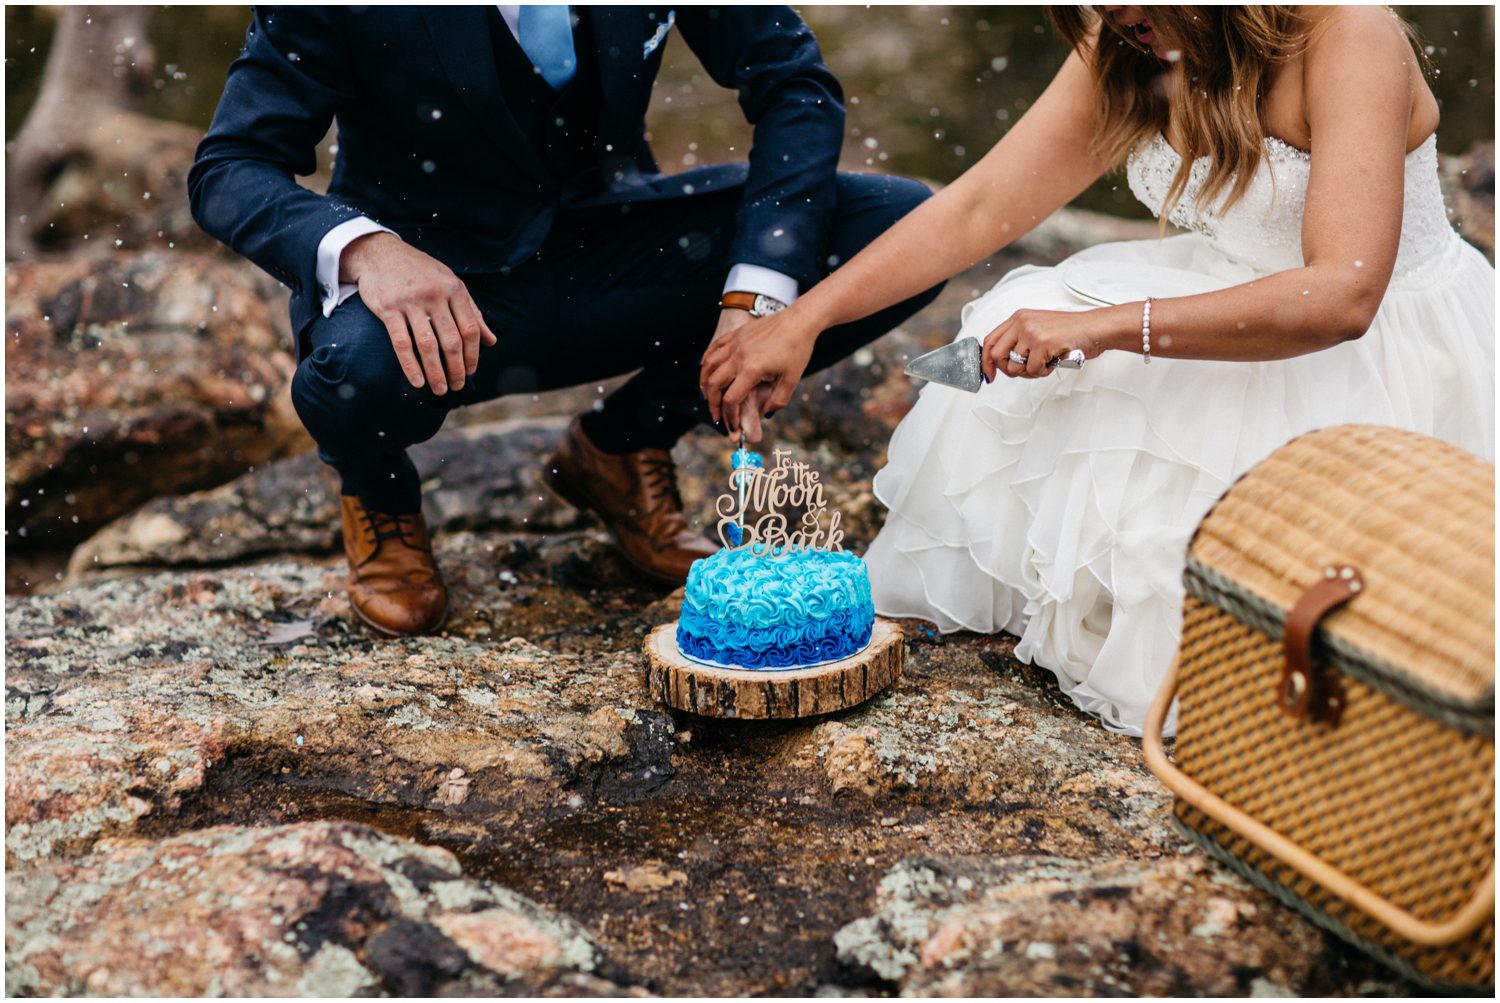 Elopement cake cutting, Elopement traditions, unique elopement ideas, Ombre wedding cake, Elopement cake, Laser cut cake topper, to the moon and back cake topper, Colorado Elopement Photographer, Rocky Mountain National Park Elopement, Estes Park Elopement, 3M Curve Elopement, Colorado Elopement Photos, Elope in Colorado, Adventure Wedding in Colorado, Adventurous Wedding Photographer, Colorado Winter Wedding, Colorado Wedding Locations, Colorado Elopement Locations, Adventure Elopement, Elopement Photographer, Destination Elopement, Mountain Elopement, Elopement Ideas